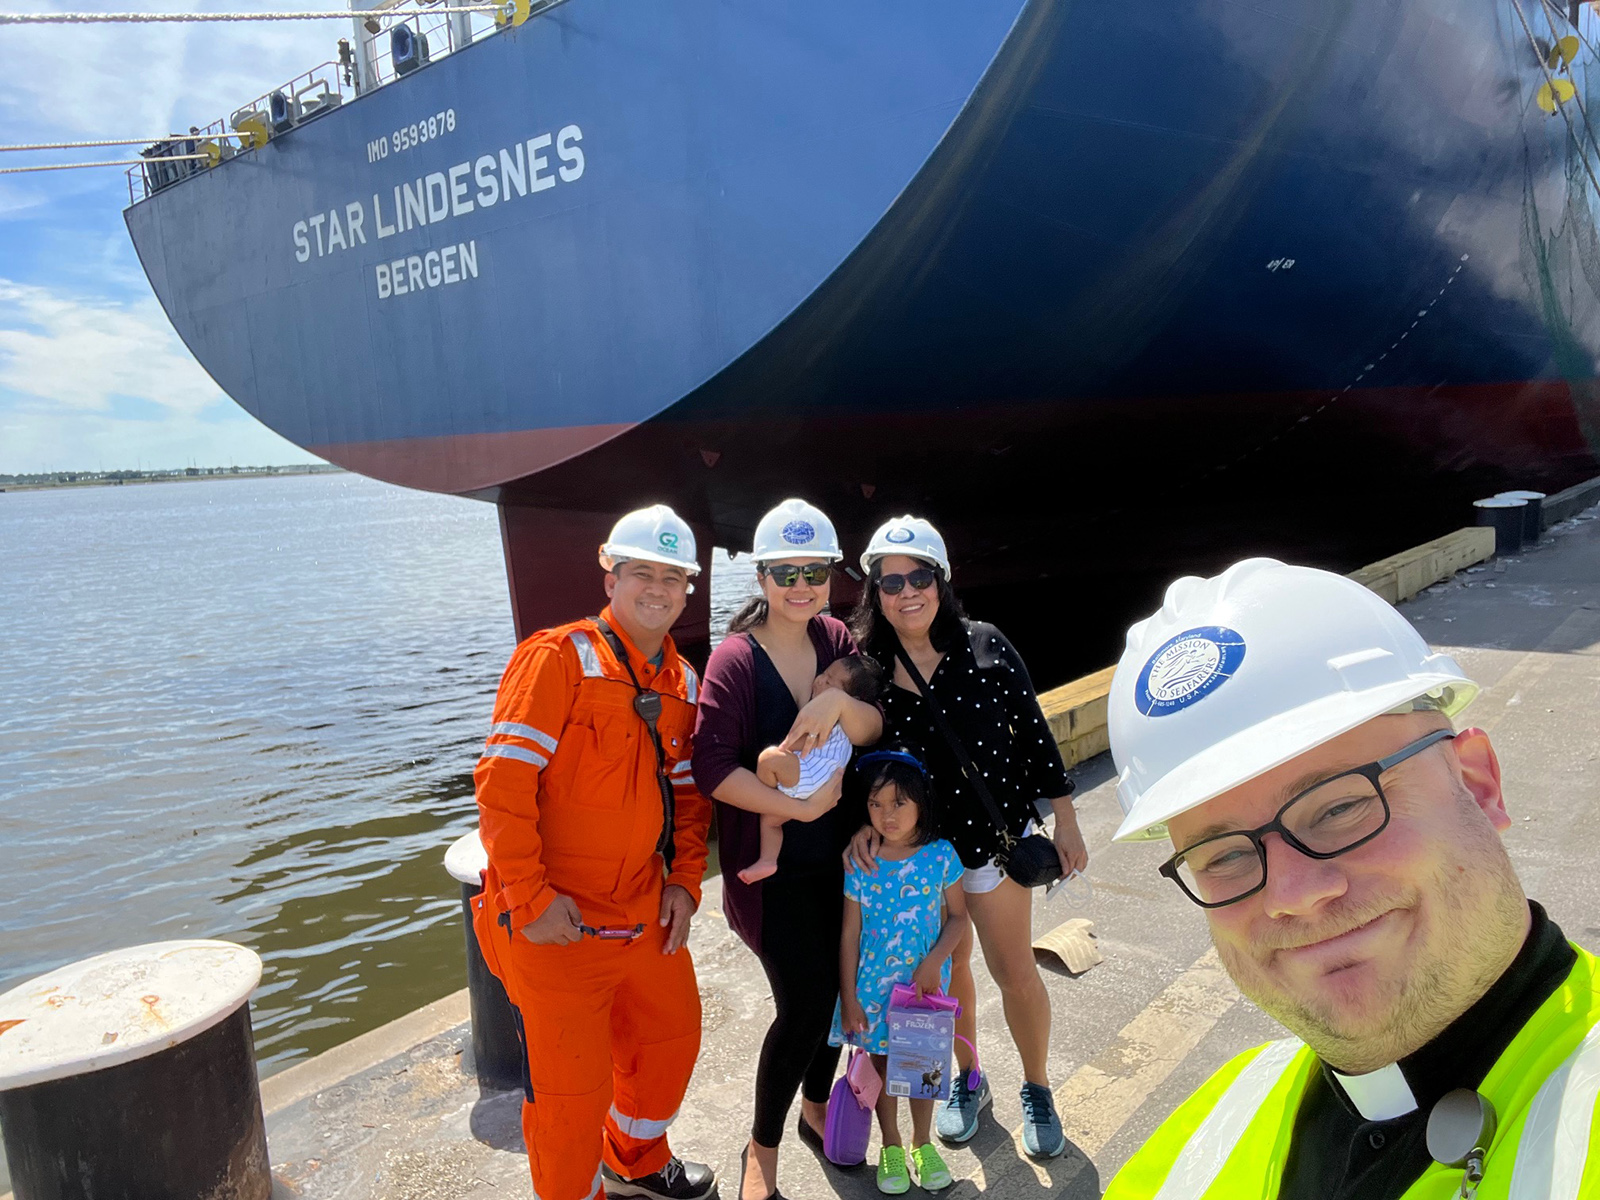 The Rev. Joshua Messick, right, executive director of the Baltimore International Seafarers’ Center in Maryland, takes a selfie with a seafarer and his family. (Photo courtesy Joshua Messick)